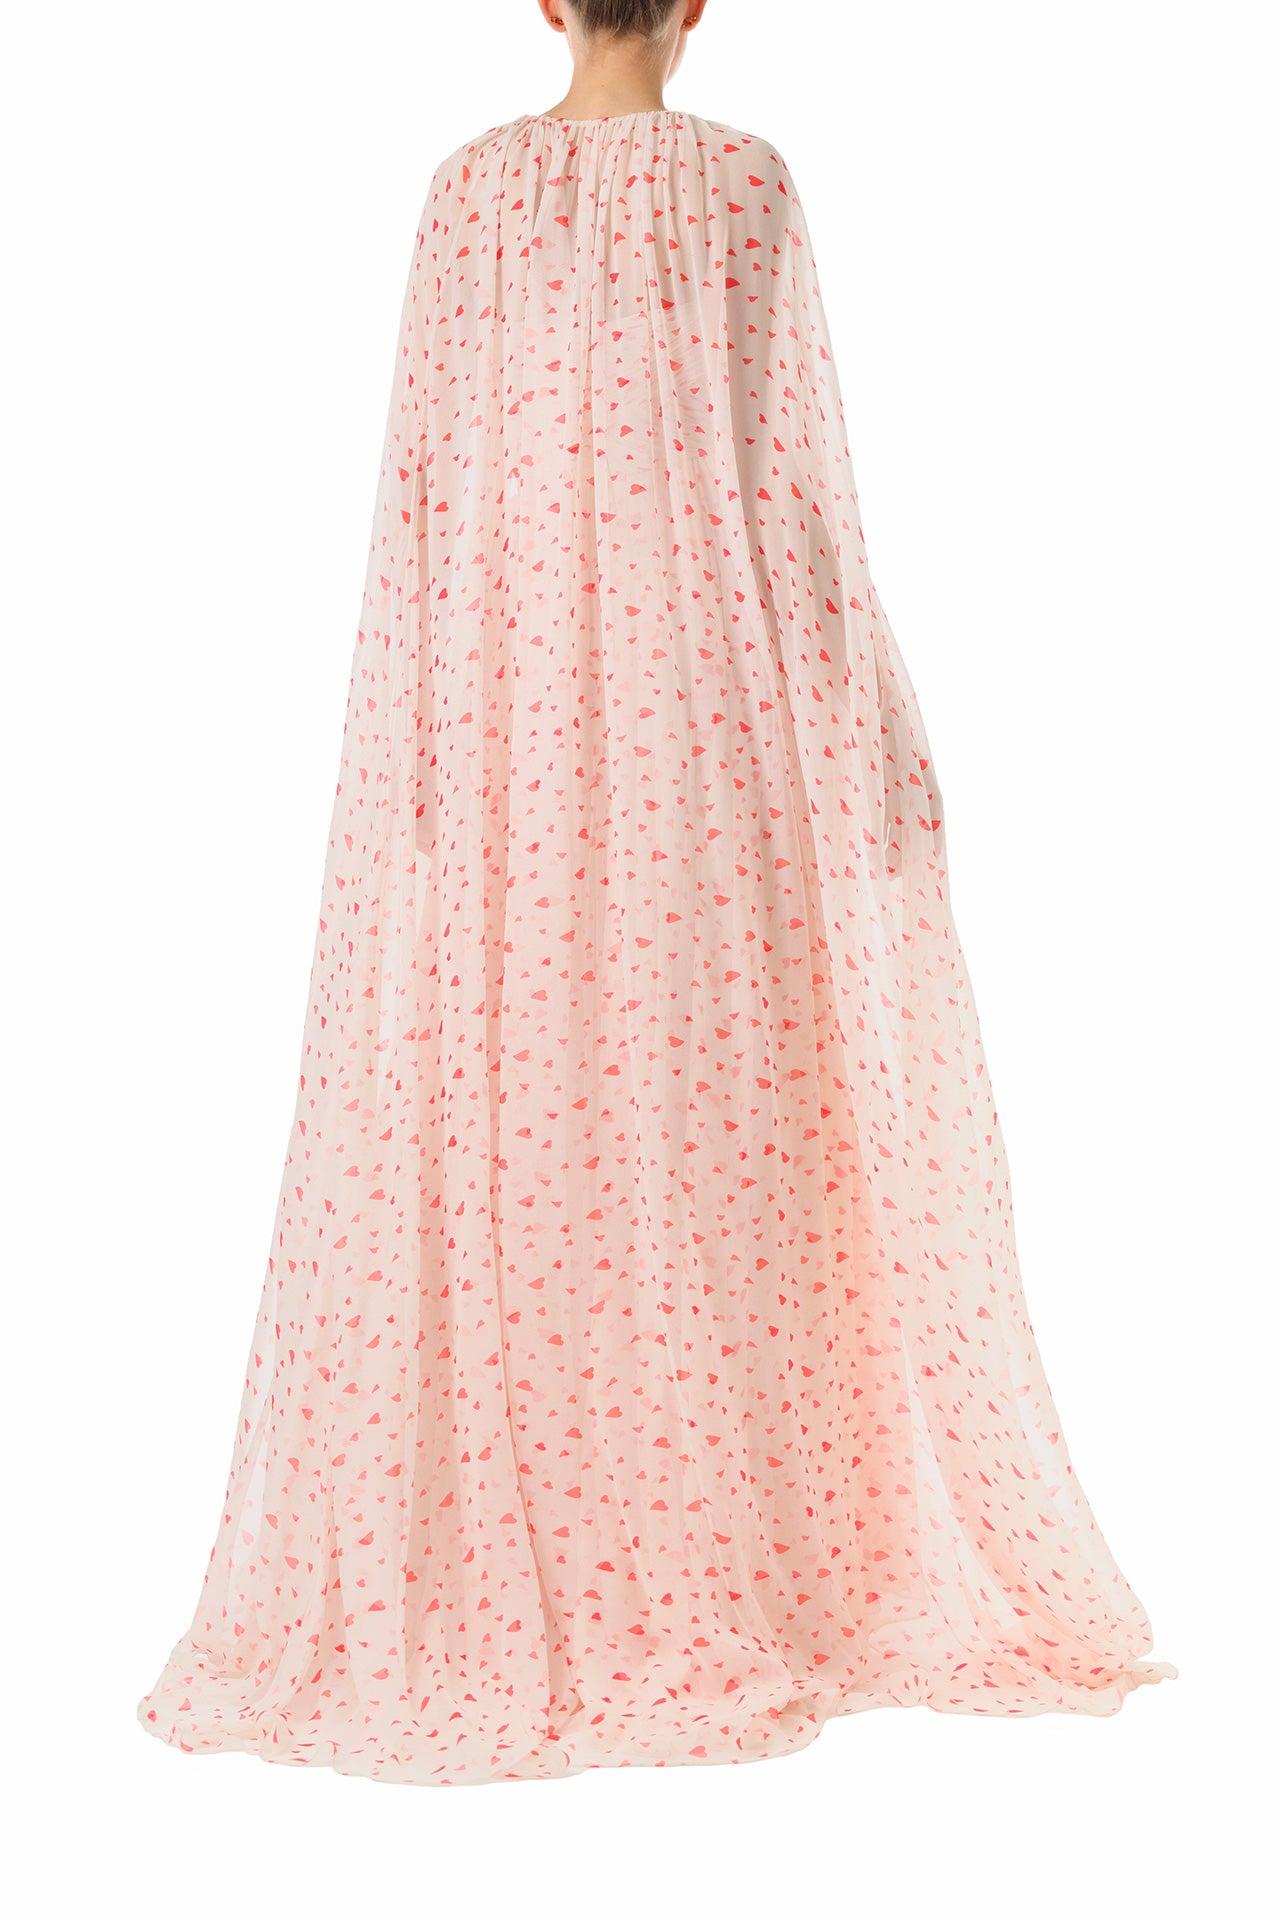 Monique Lhuillier Fall 2024 chiffon cape shown over the matching strapless gown with gathered sweetheart bodice in heart printed chiffon fabric - back.